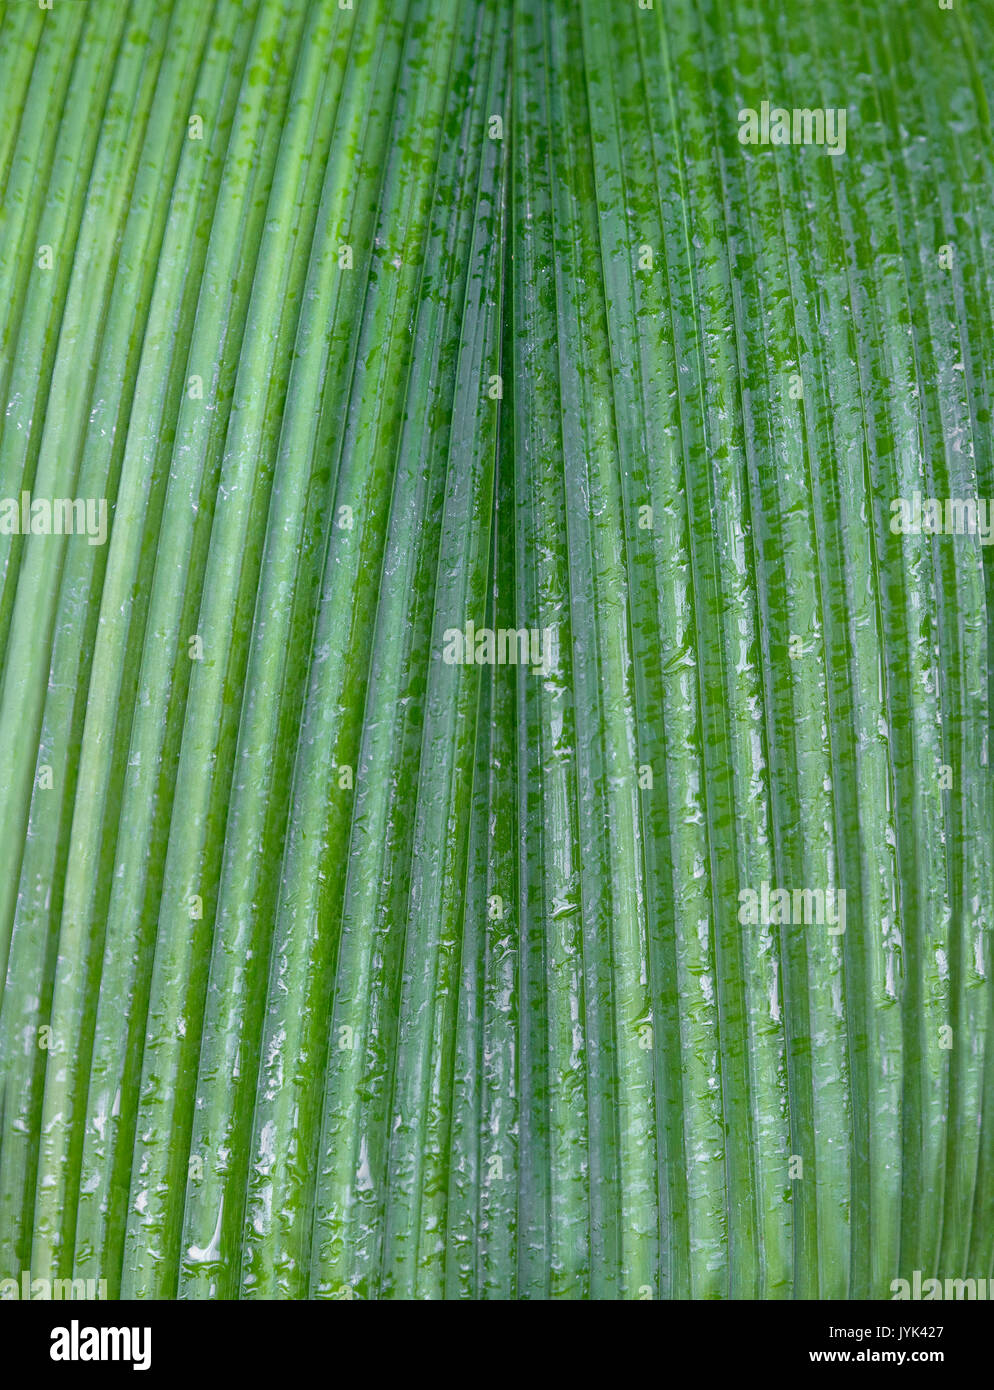 Green leaf texture background Stock Photo